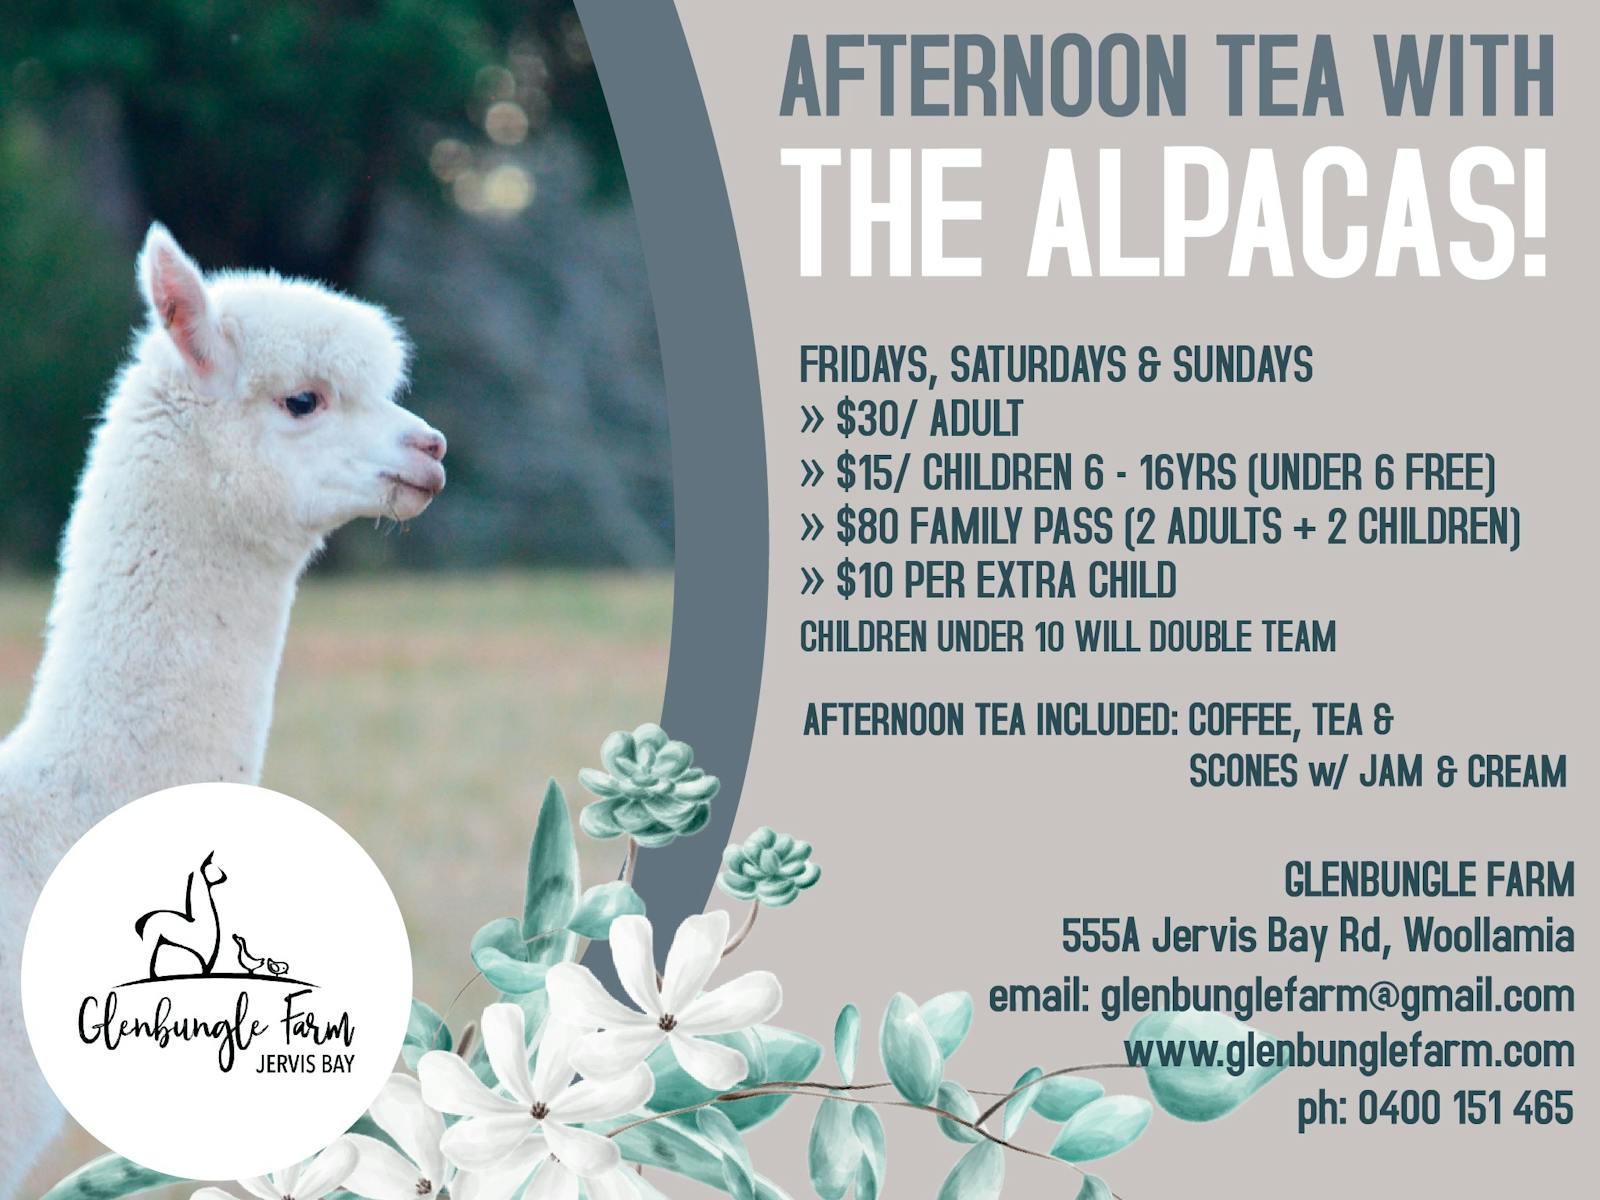 Image for Afternoon Tea with the Alpacas!